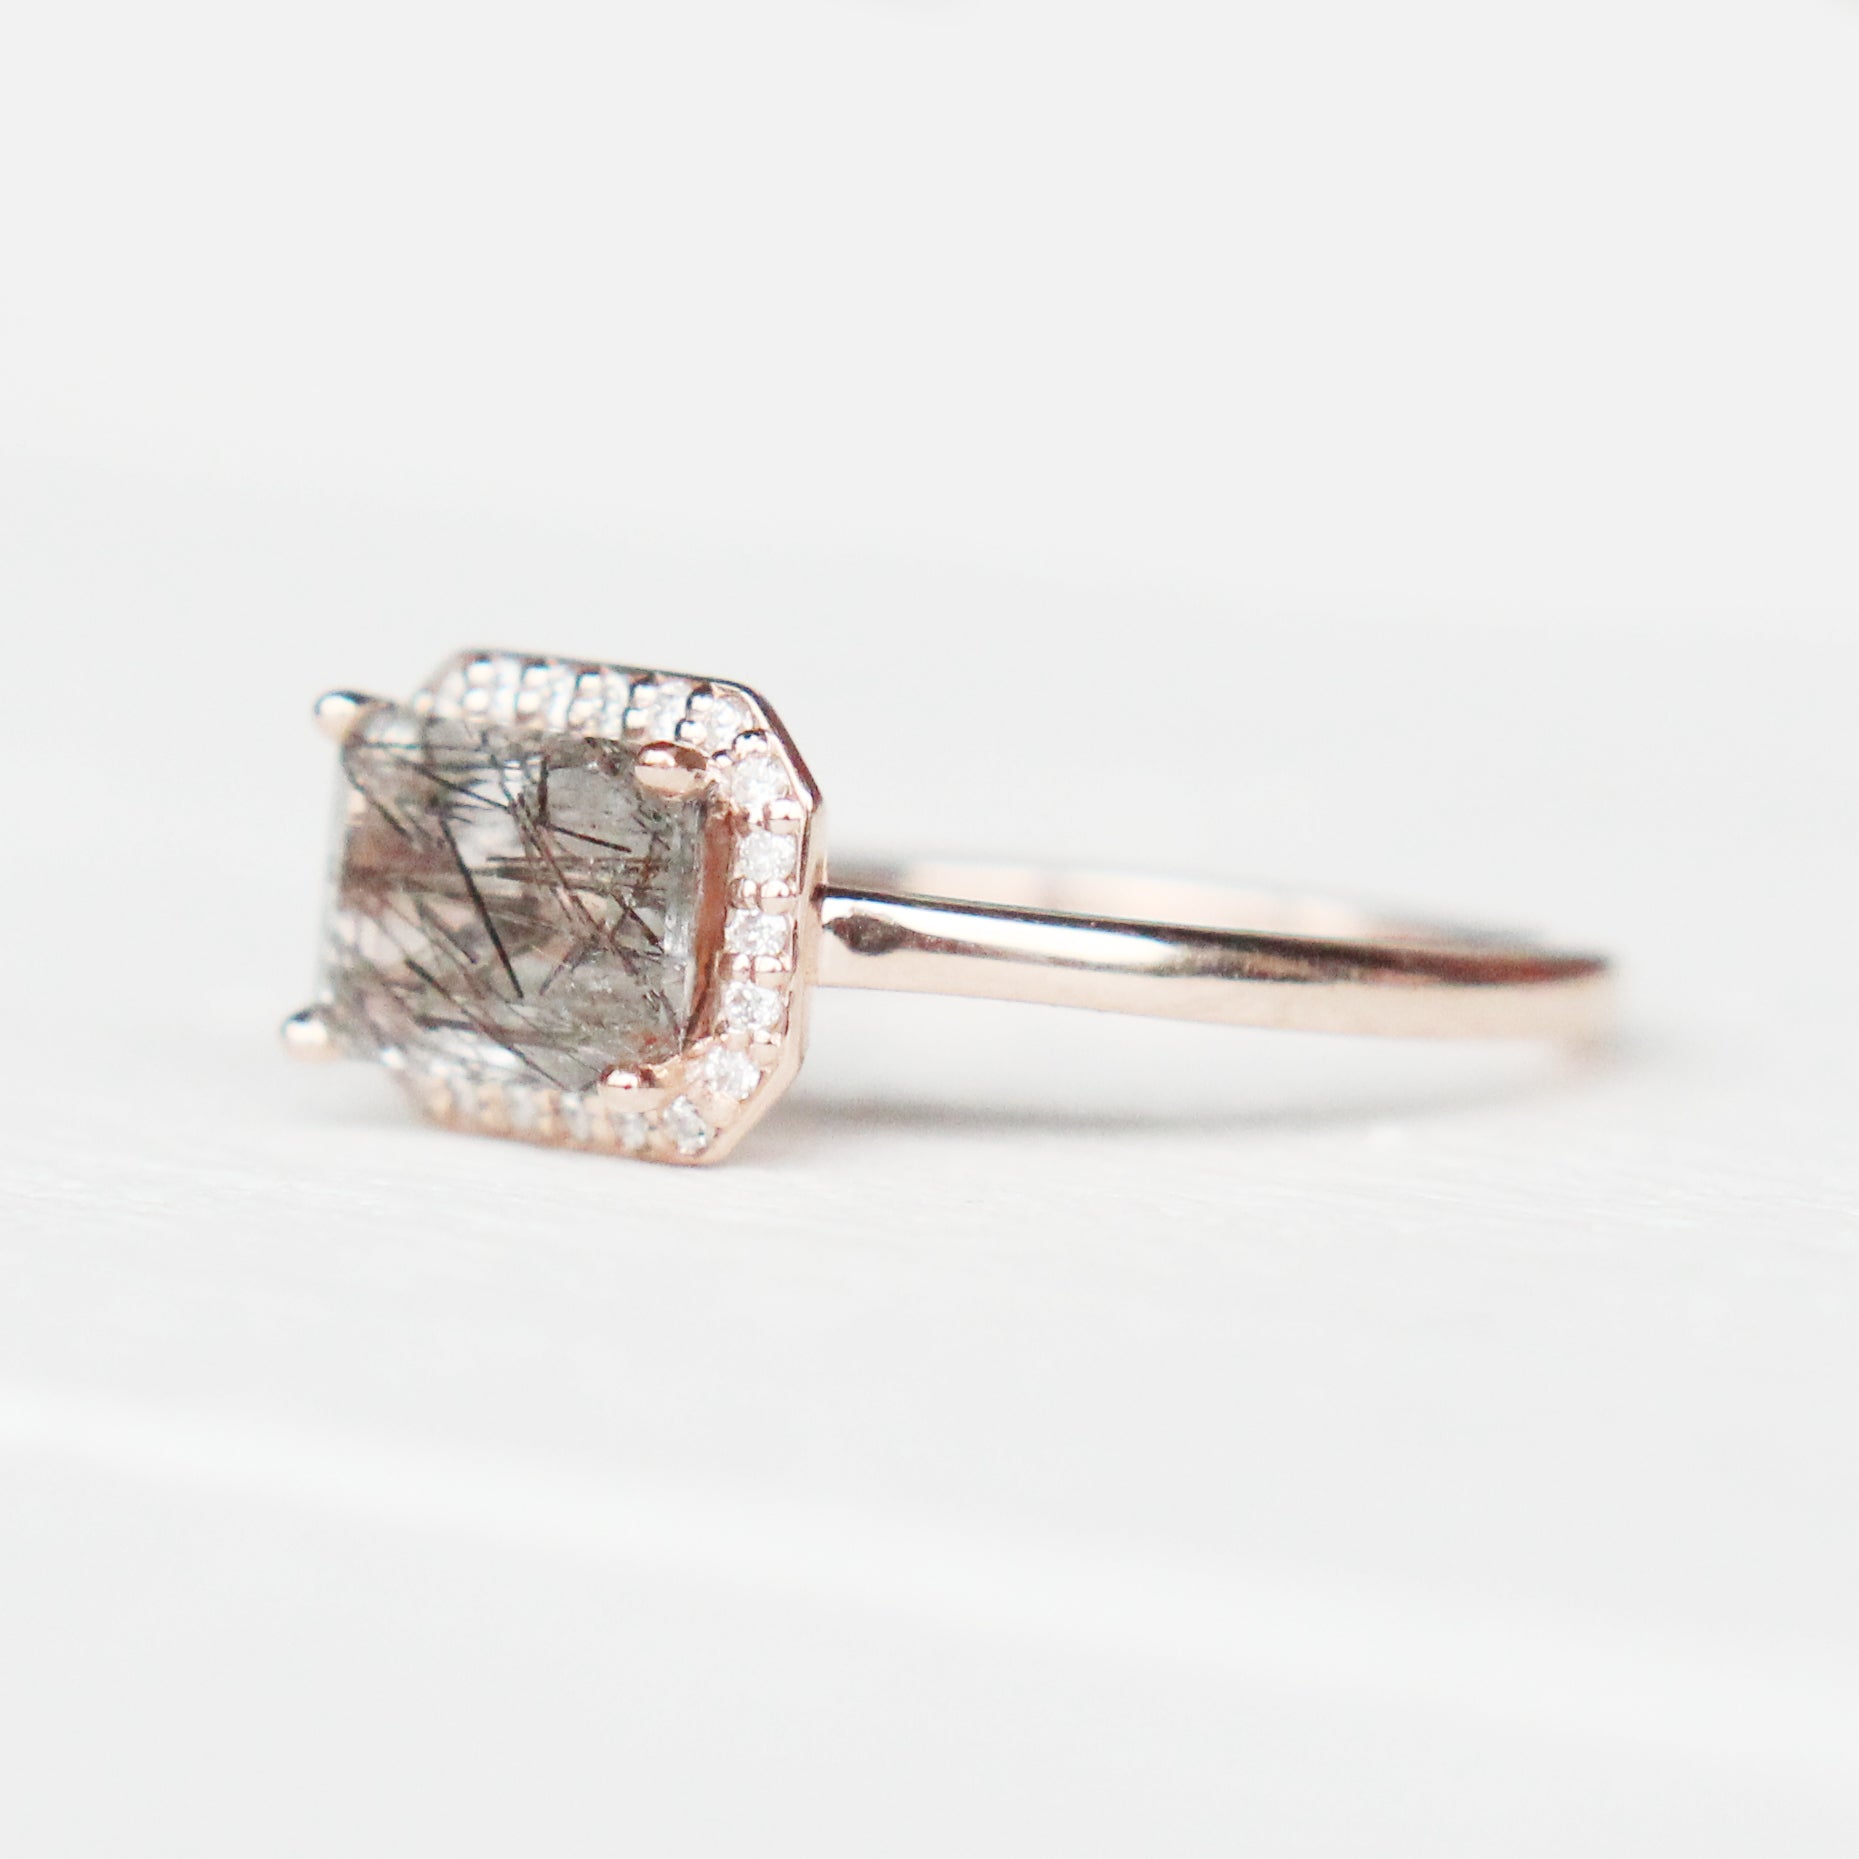 Kait - Emerald Cut Tourmalinated Quartz in a Diamond Halo - Pick your diamonds and metal - Midwinter Co. Alternative Bridal Rings and Modern Fine Jewelry